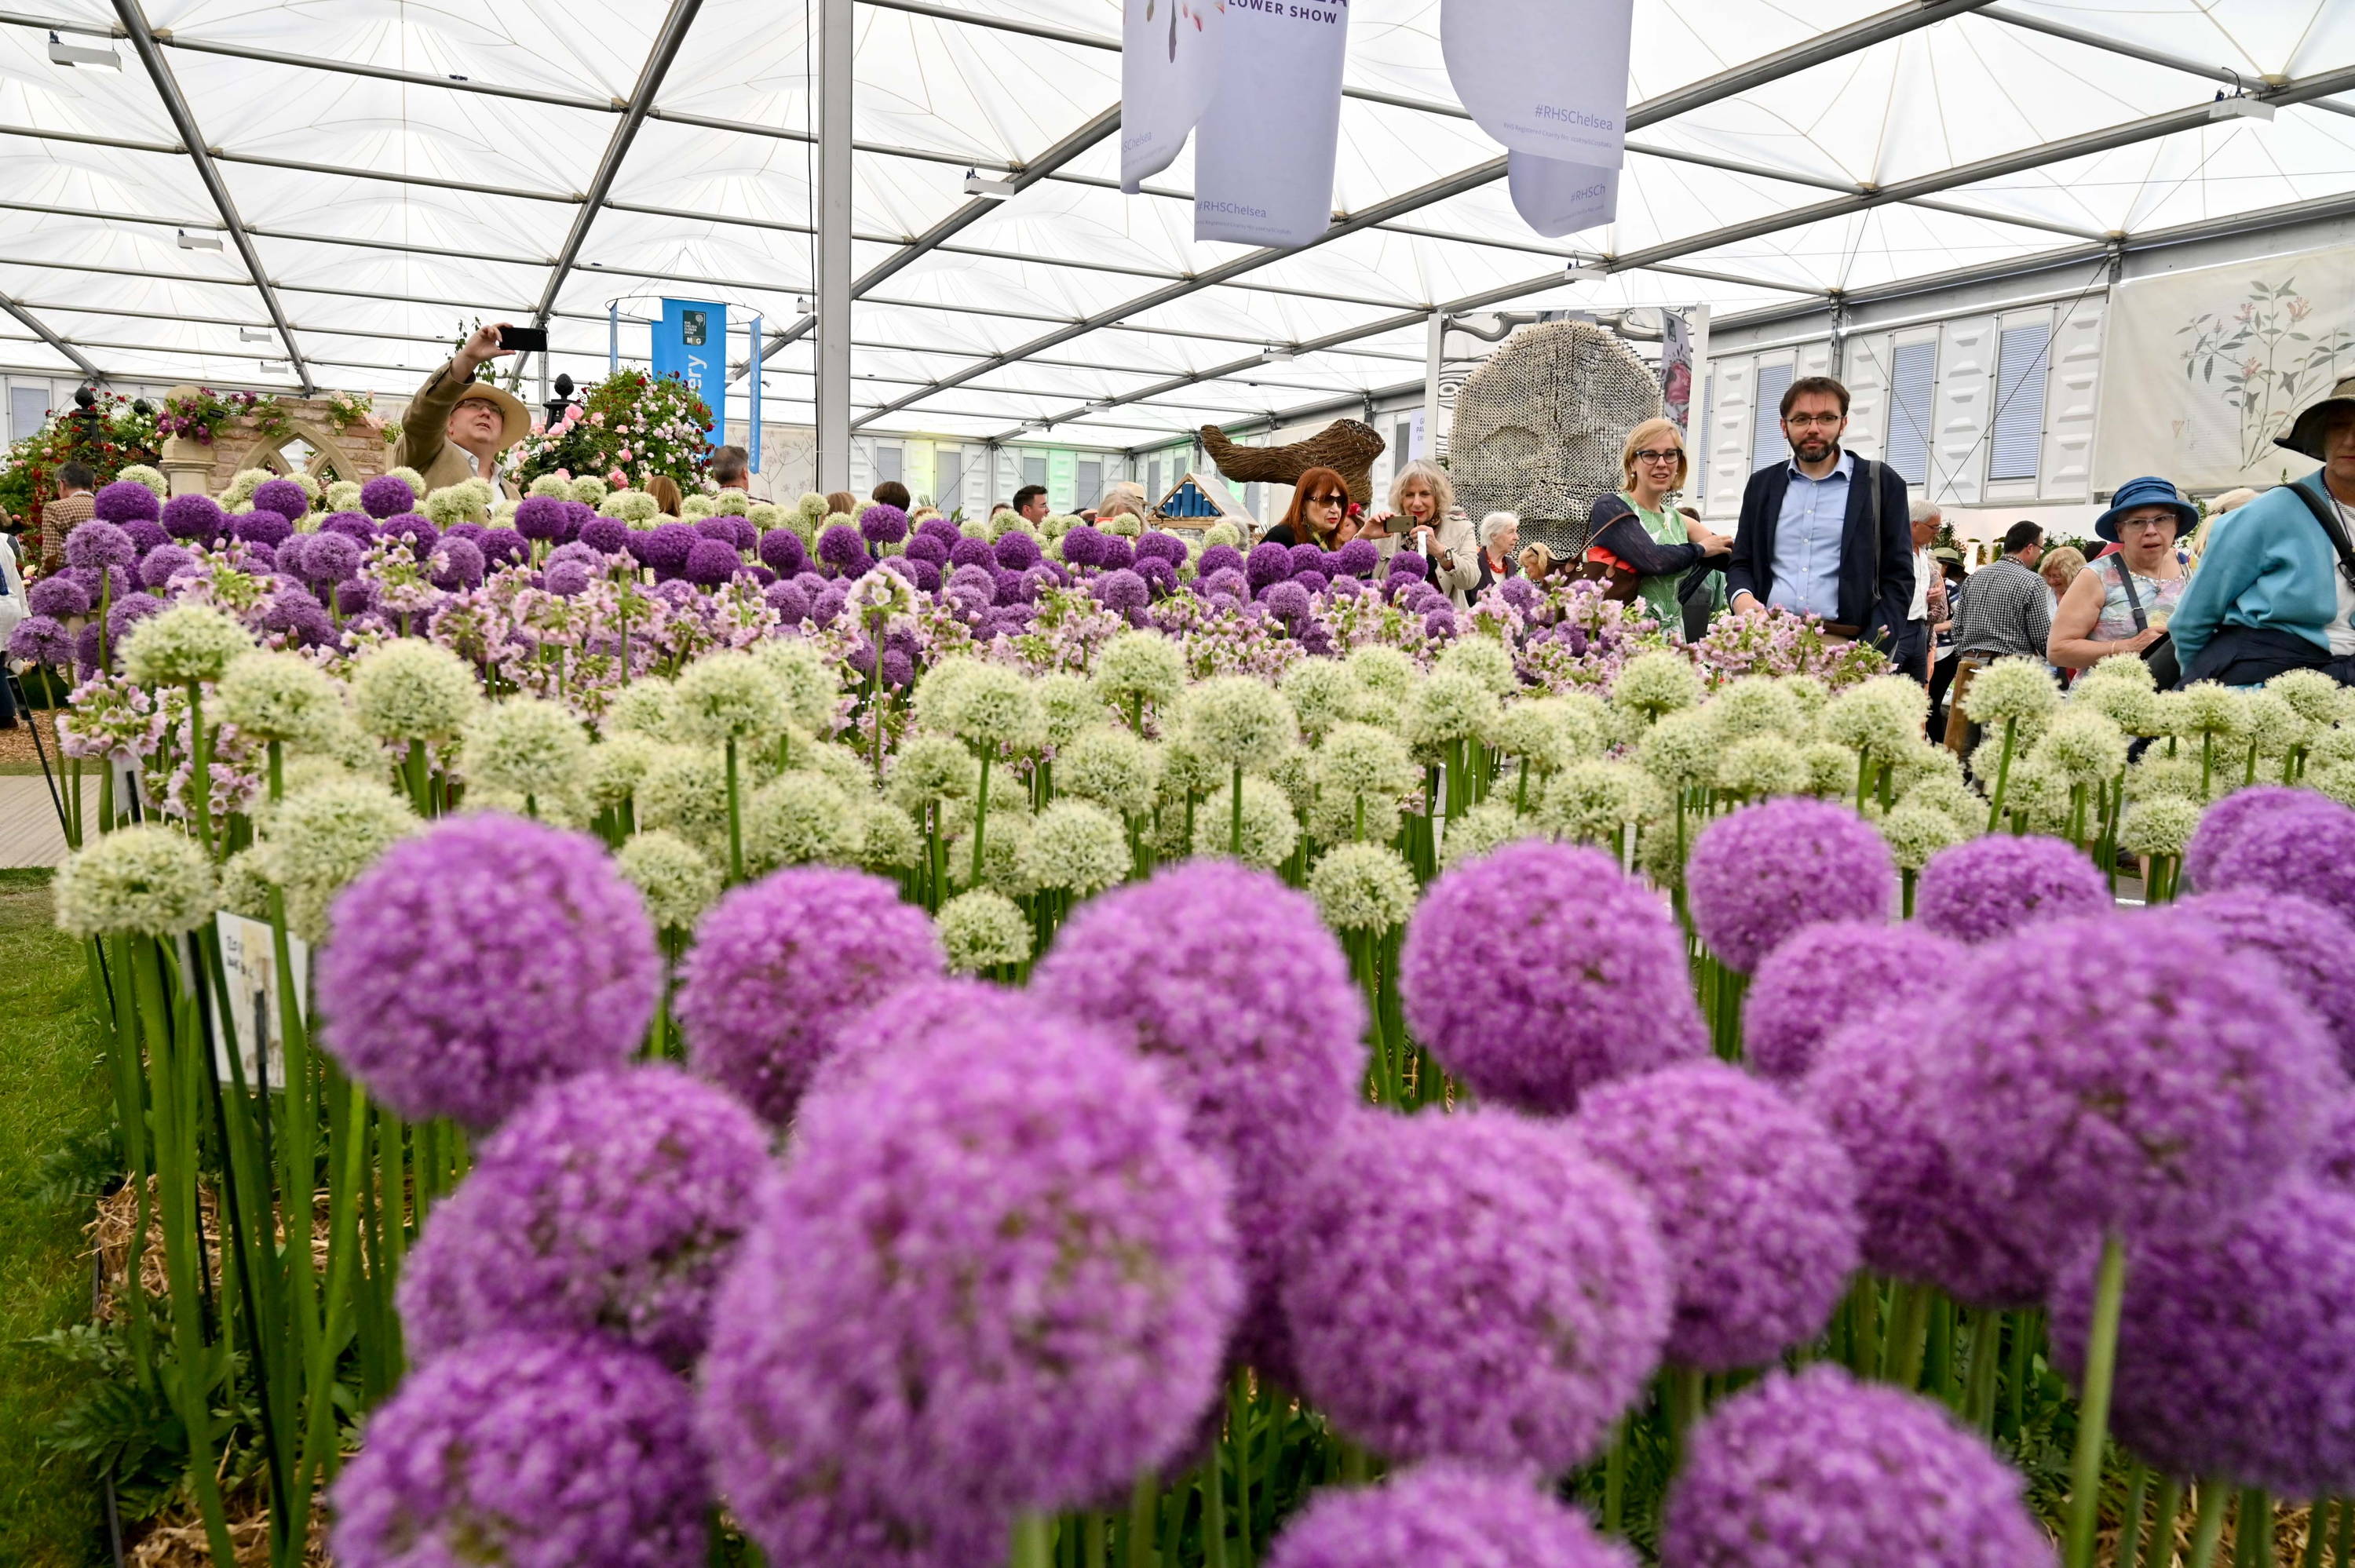 Alliums at the 2019 Chelsea Flower Show